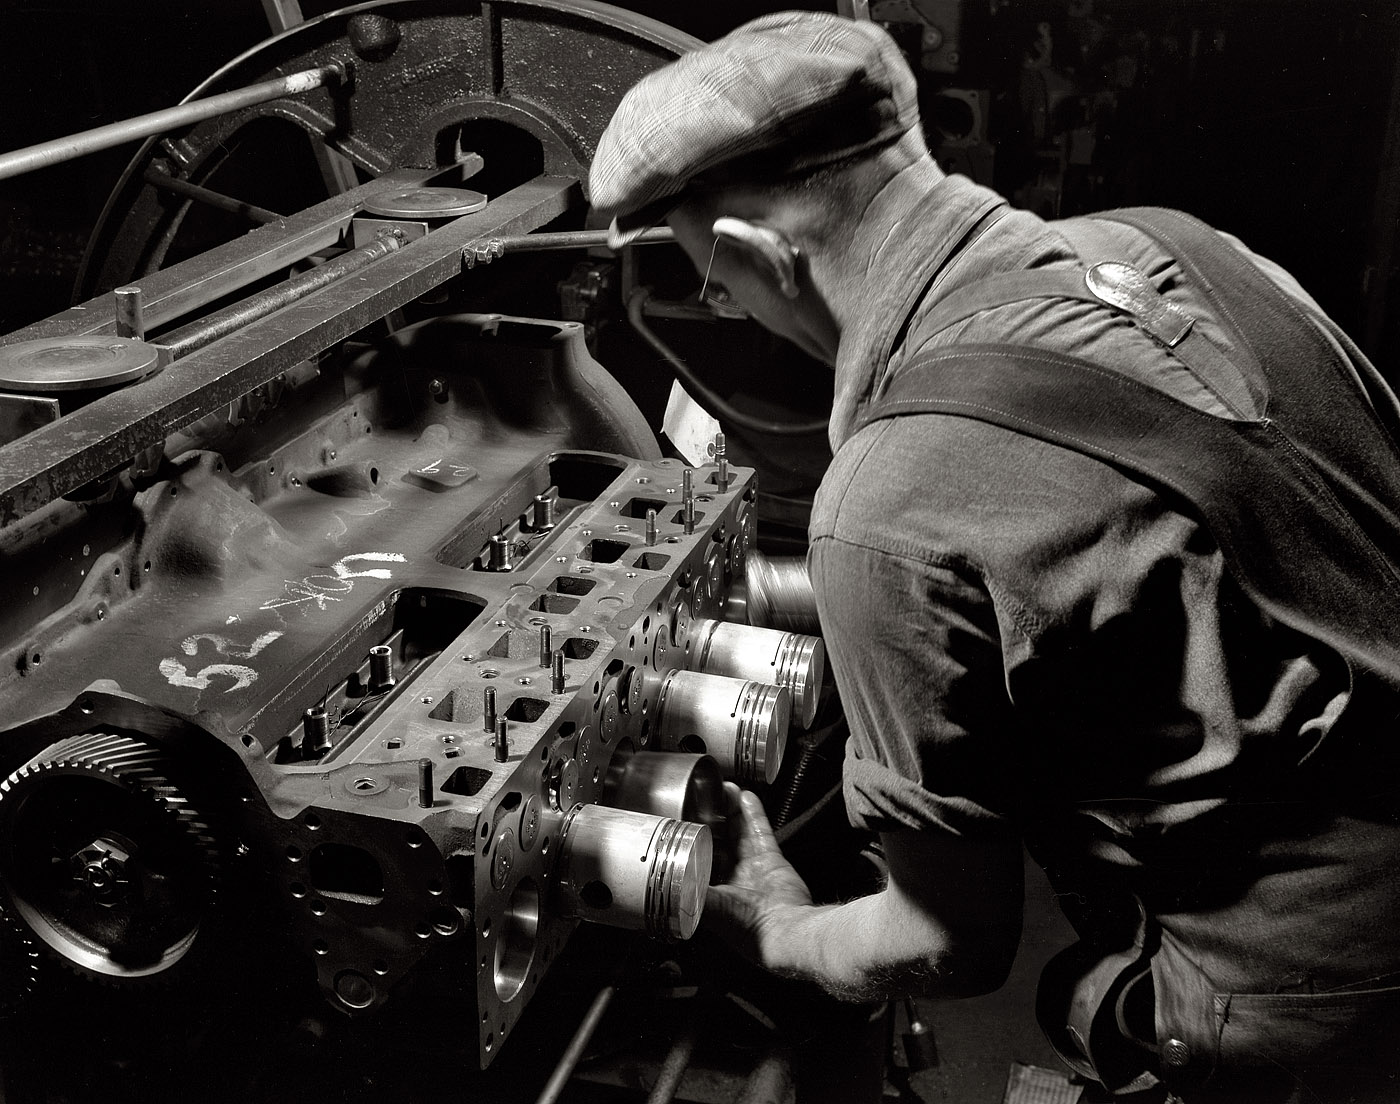 Another selection from the LOC archives of Alfred Palmer's strikingly composed large-format black-and-white transparencies shot in December 1941 at factories in Akron and Cleveland. White Motor Company, Cleveland, Ohio. "Halftrac scout cars. Putting precision-made pistons assemblies into precision-made cylinders is a job that fits this former auto worker. The engine will be the power plant of an Army halftrac scout car. The Midwest plant that is turning it out has trained American automotive workers for every job on the line." View full size. 4x5 nitrate negative by Alfred Palmer for the Office of War Information.